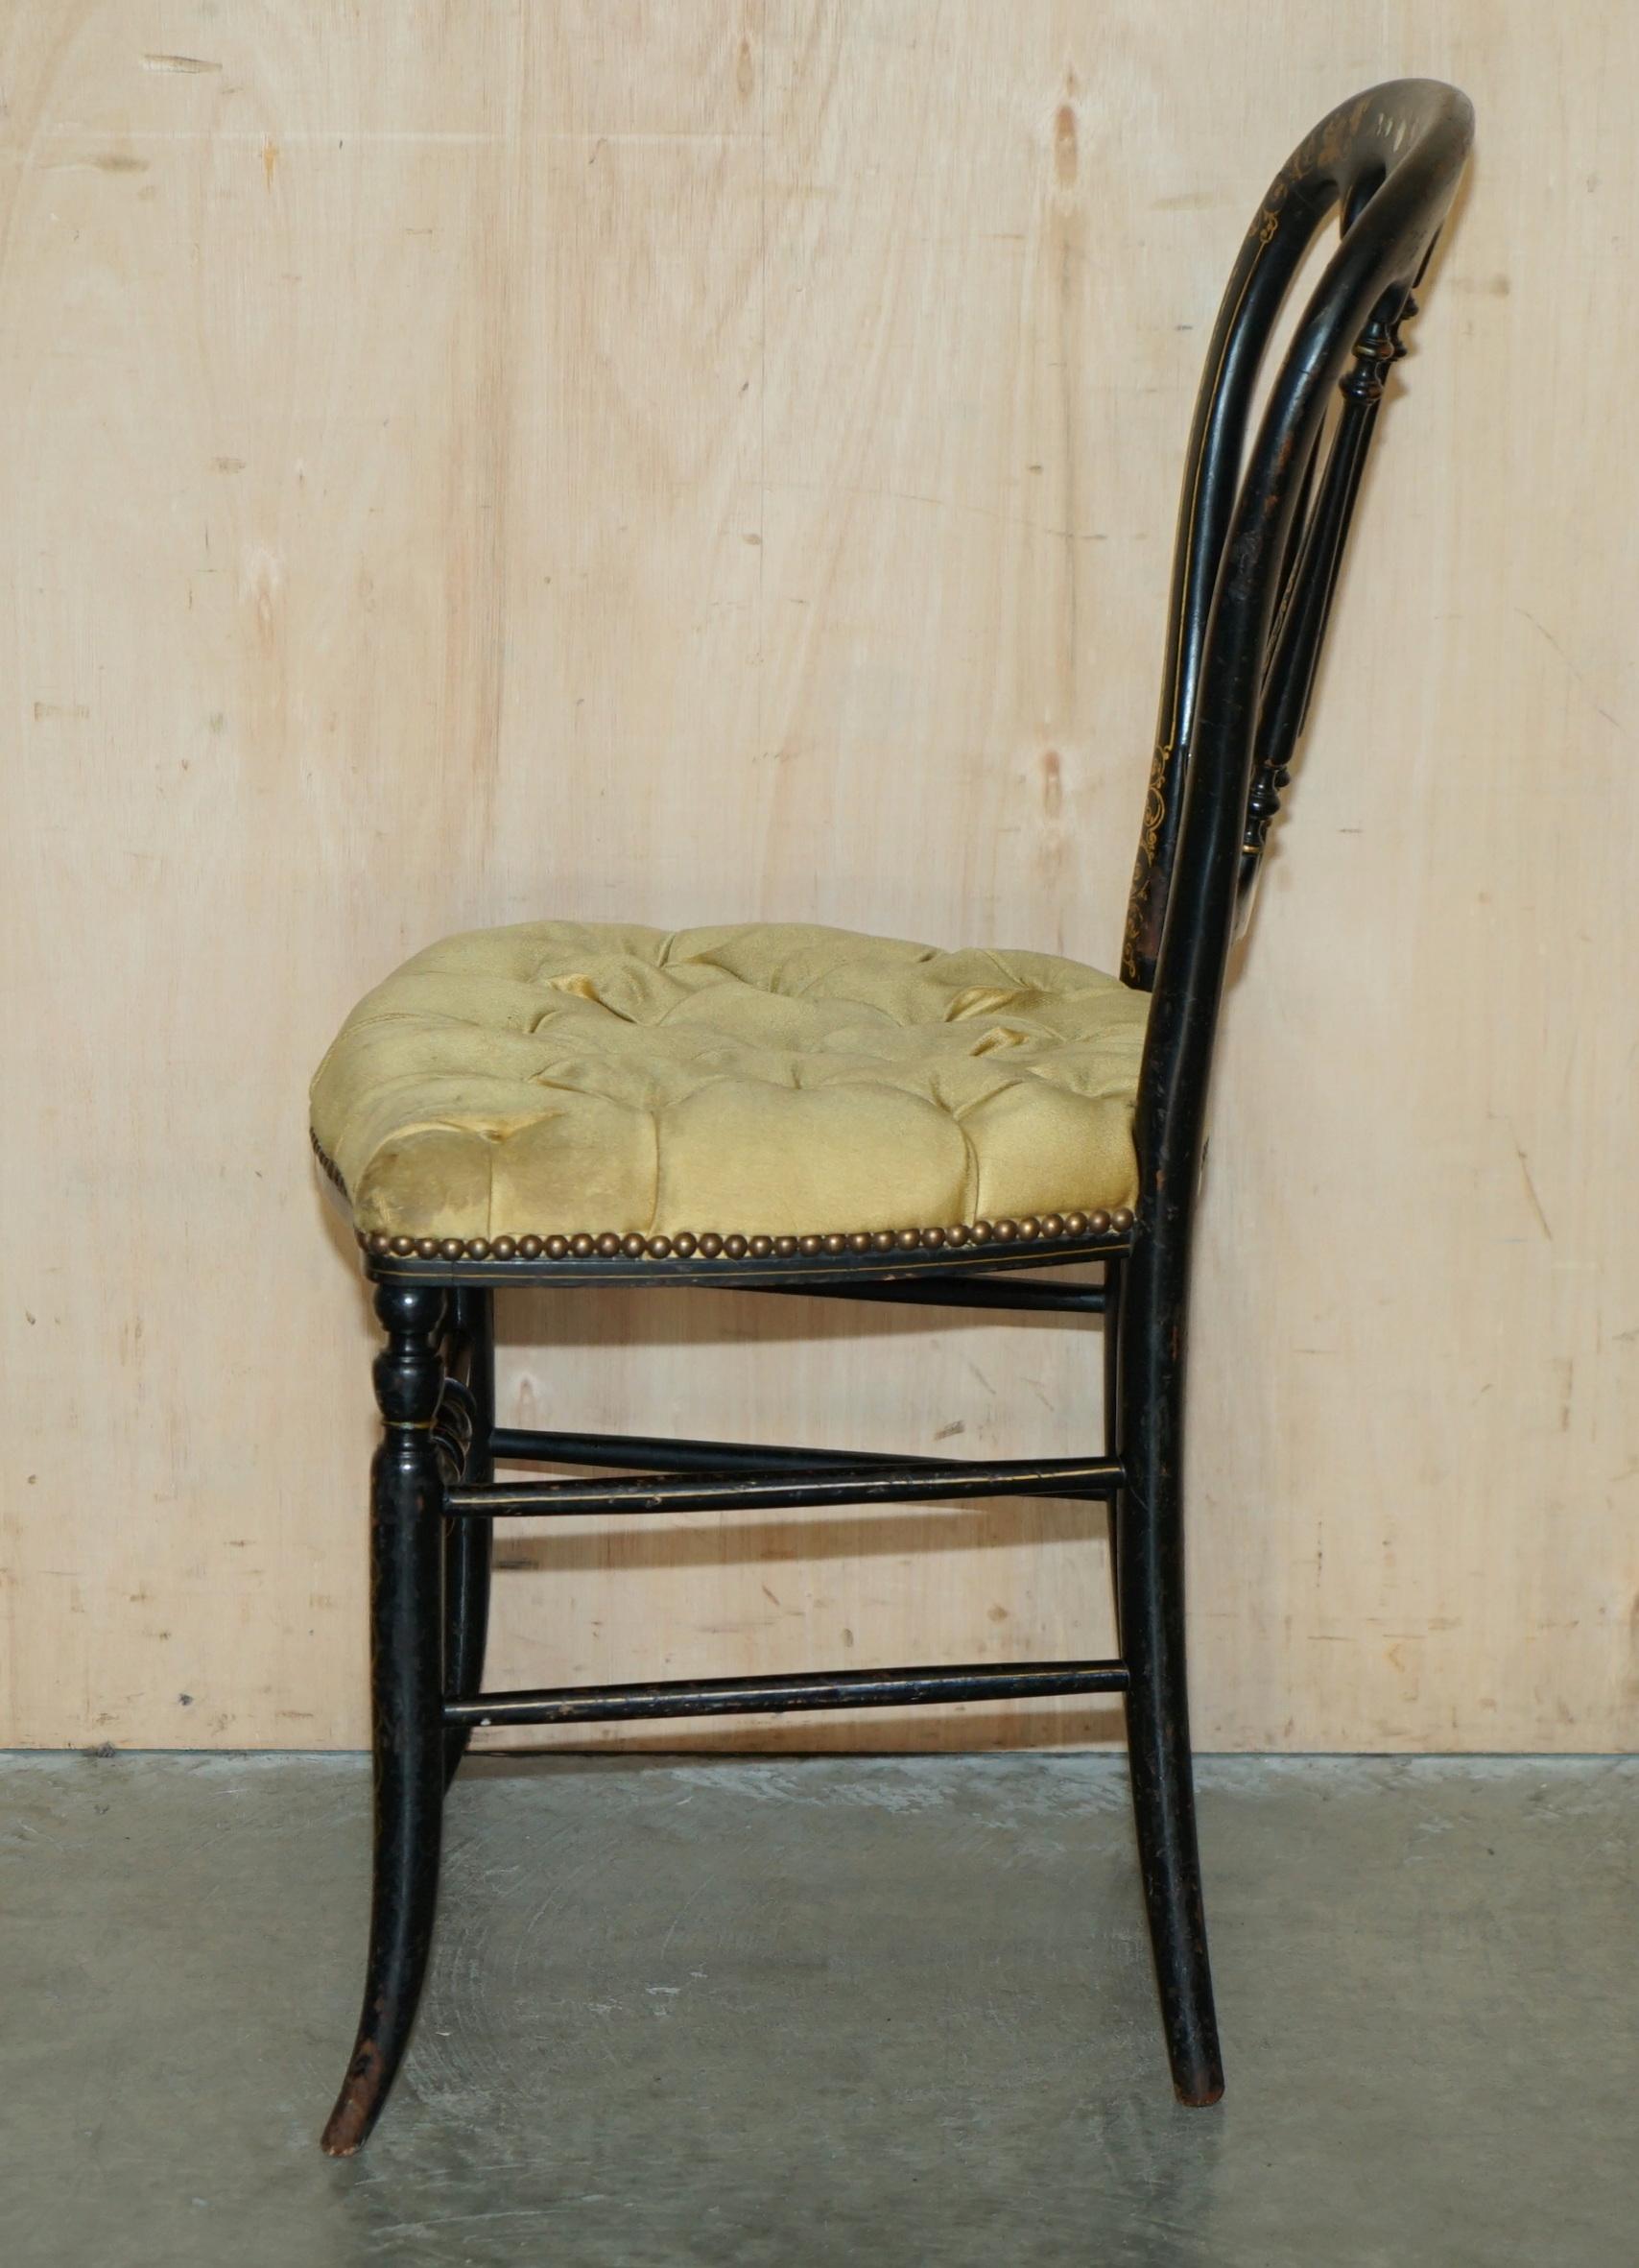 ANTIQUE REGENCY 1815 EBONiSED MOTHER OF PEARL SILK CHESTERFIELD SEAT SIDE CHAIR For Sale 12